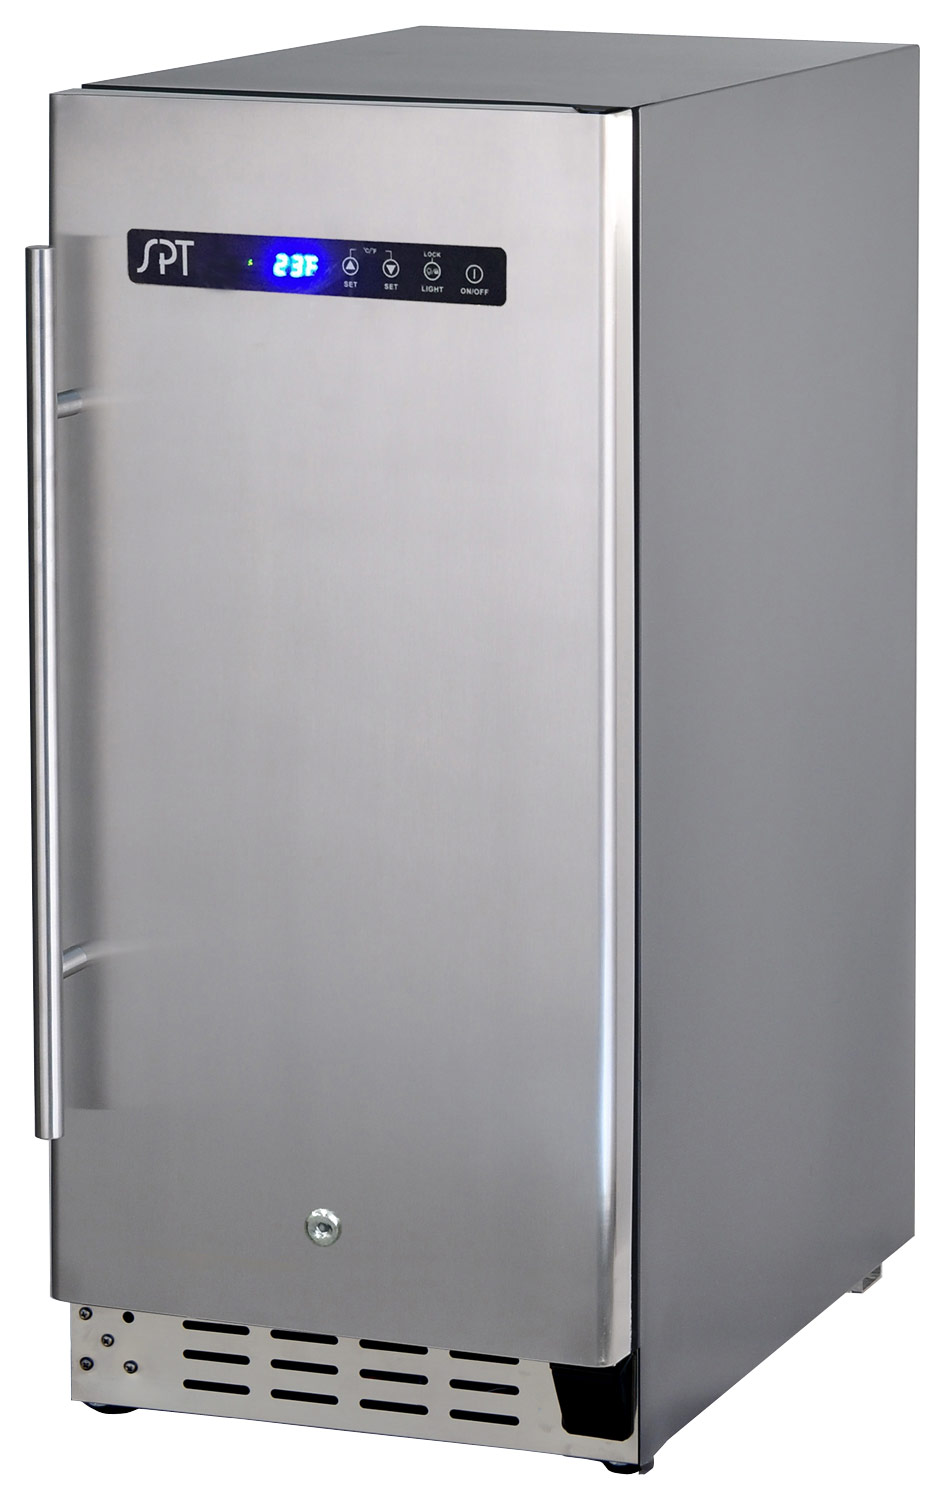 SPT - 2.9 Cu. Ft. Beer Froster - Stainless steel was $729.99 now $581.99 (20.0% off)